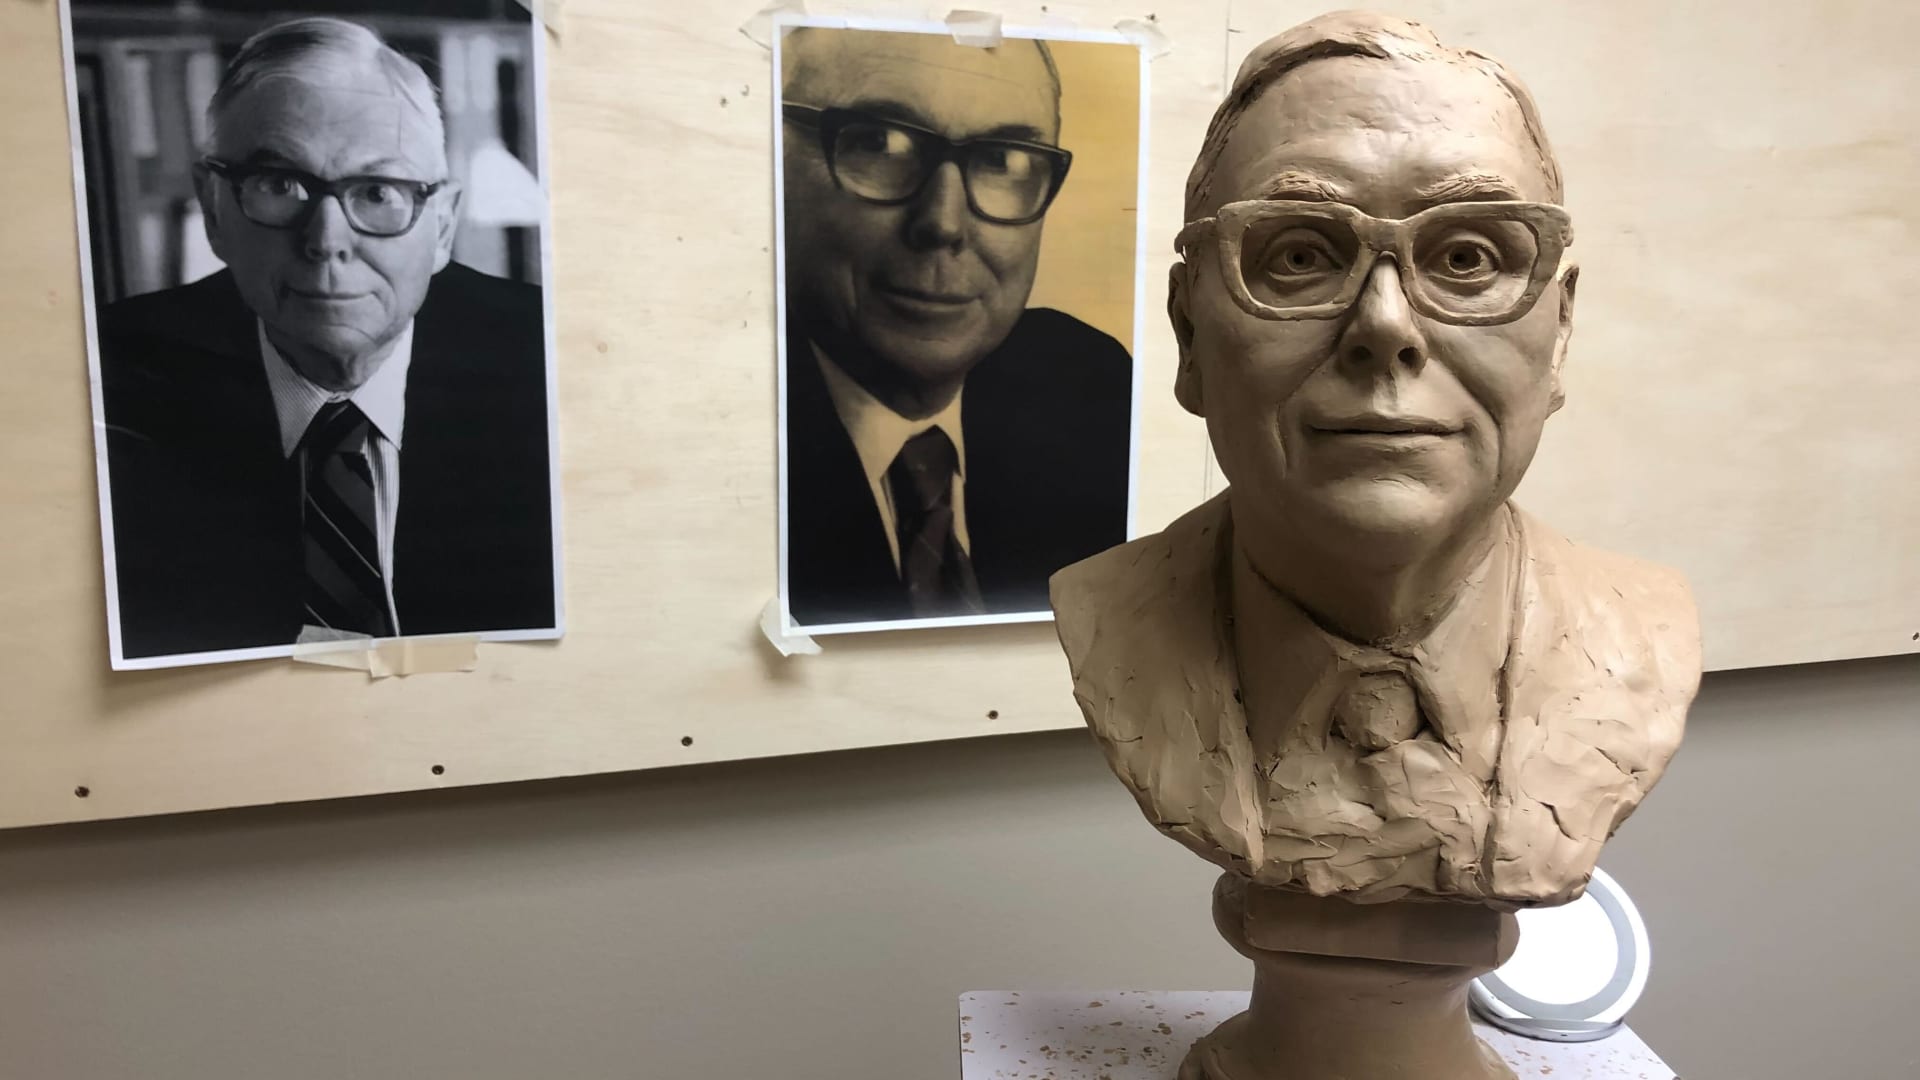 Bronze bust of the late Charlie Munger wowed crowd in Omaha at Berkshire meeting [Video]